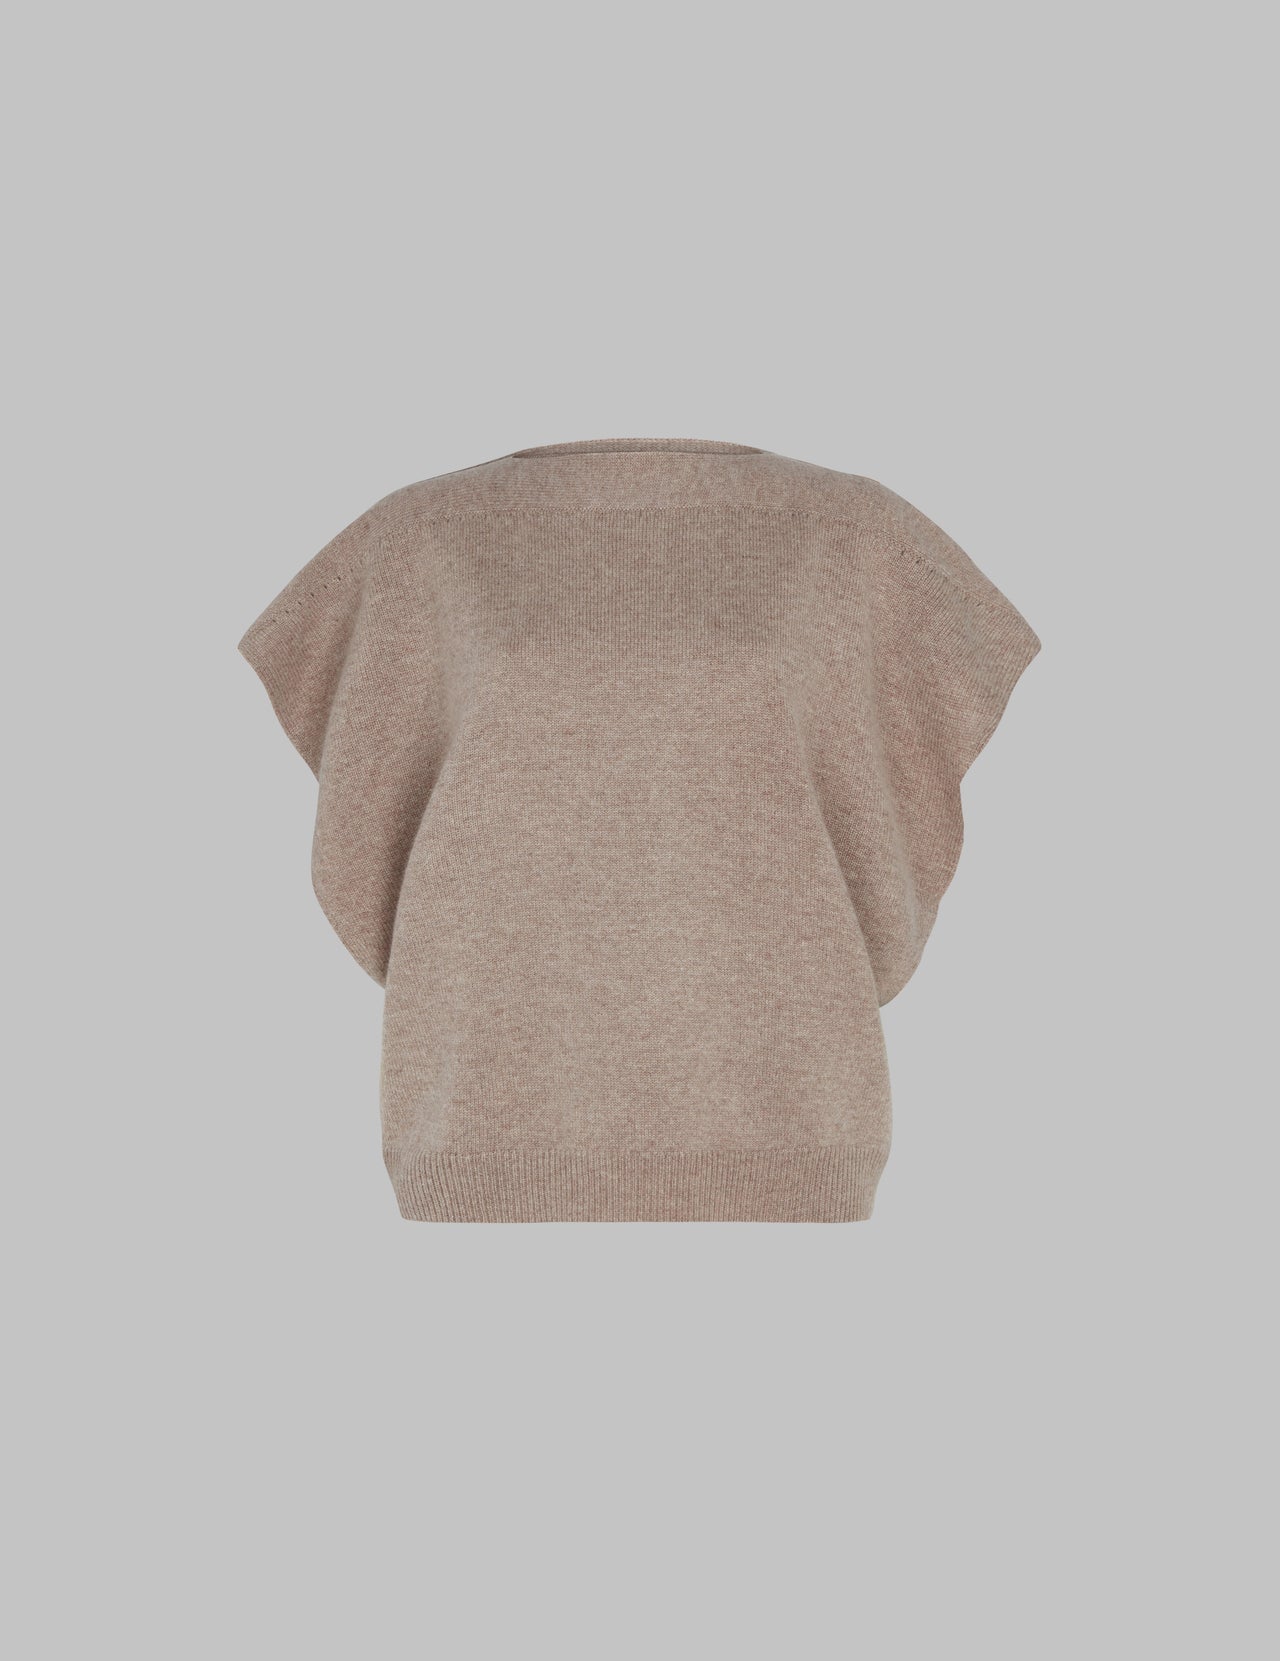  Toast Cashmere Boat Neck Top 